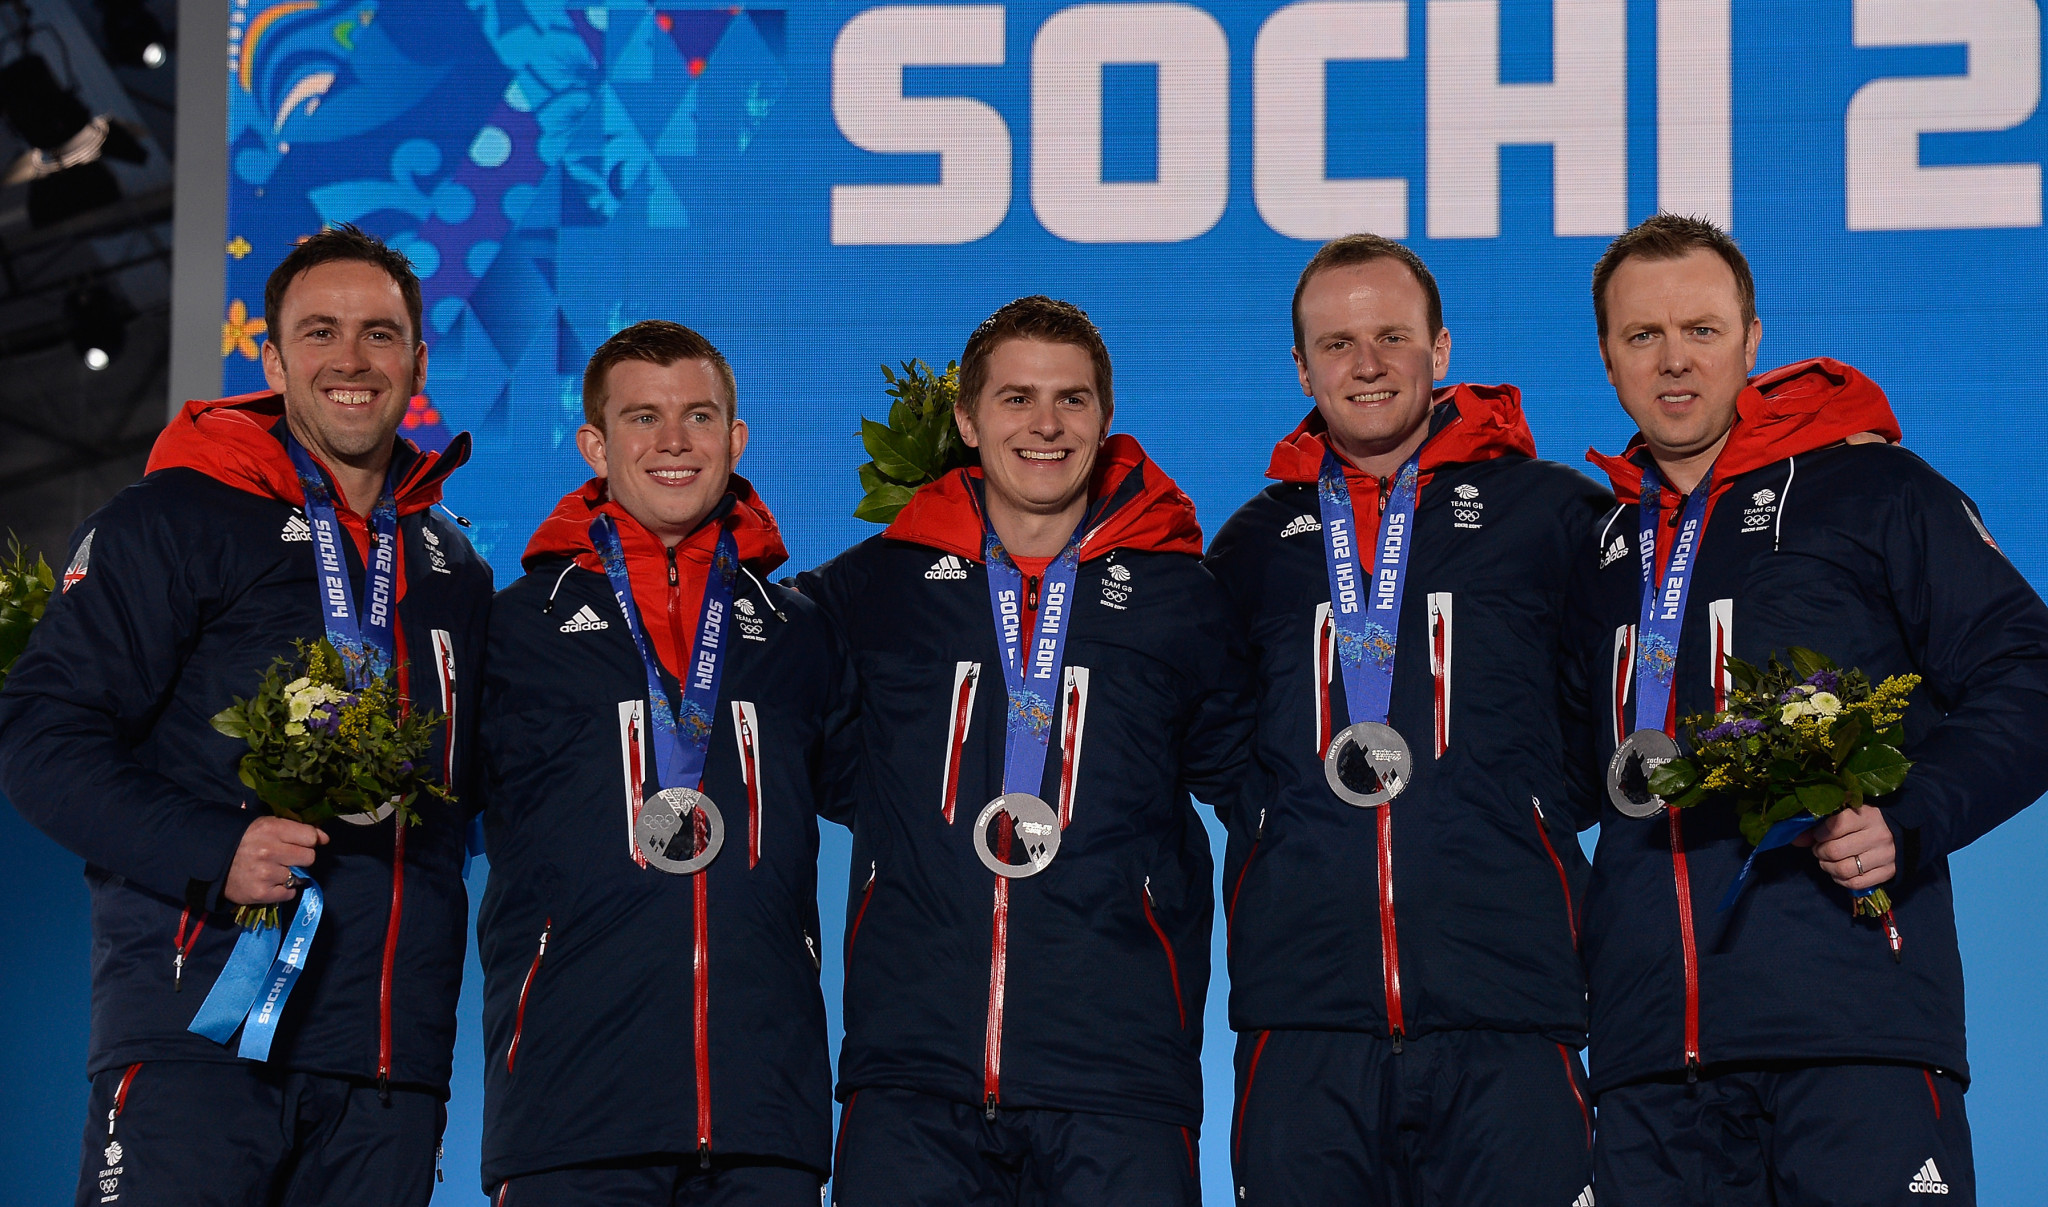 Britain's men's team won silver at the Sochi 2014 Winter Olympic Games ©Getty Images